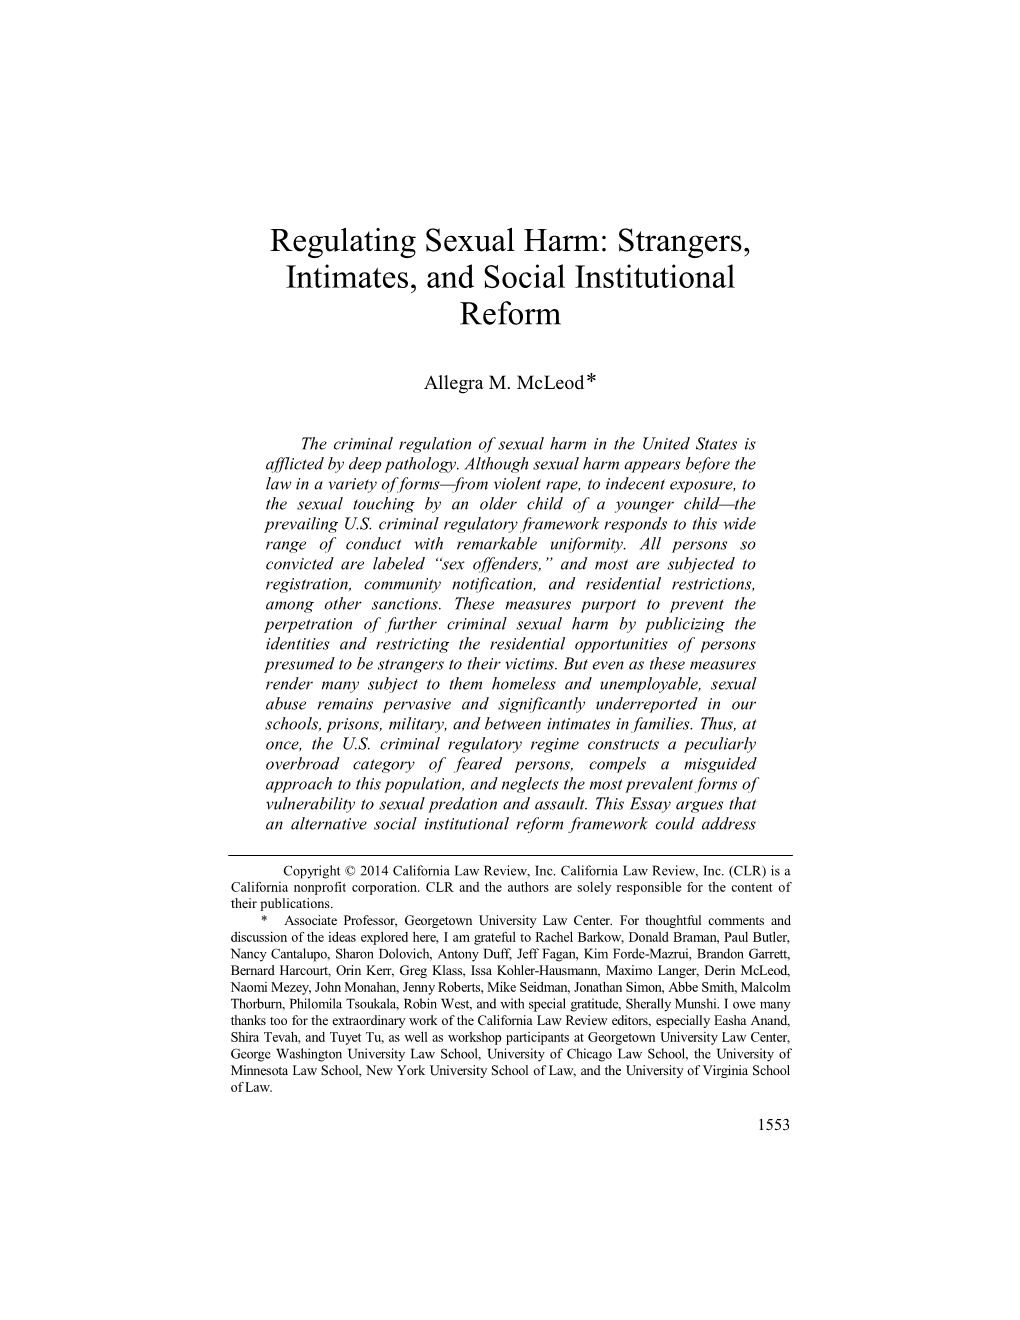 Regulating Sexual Harm: Strangers, Intimates, and Social Institutional Reform